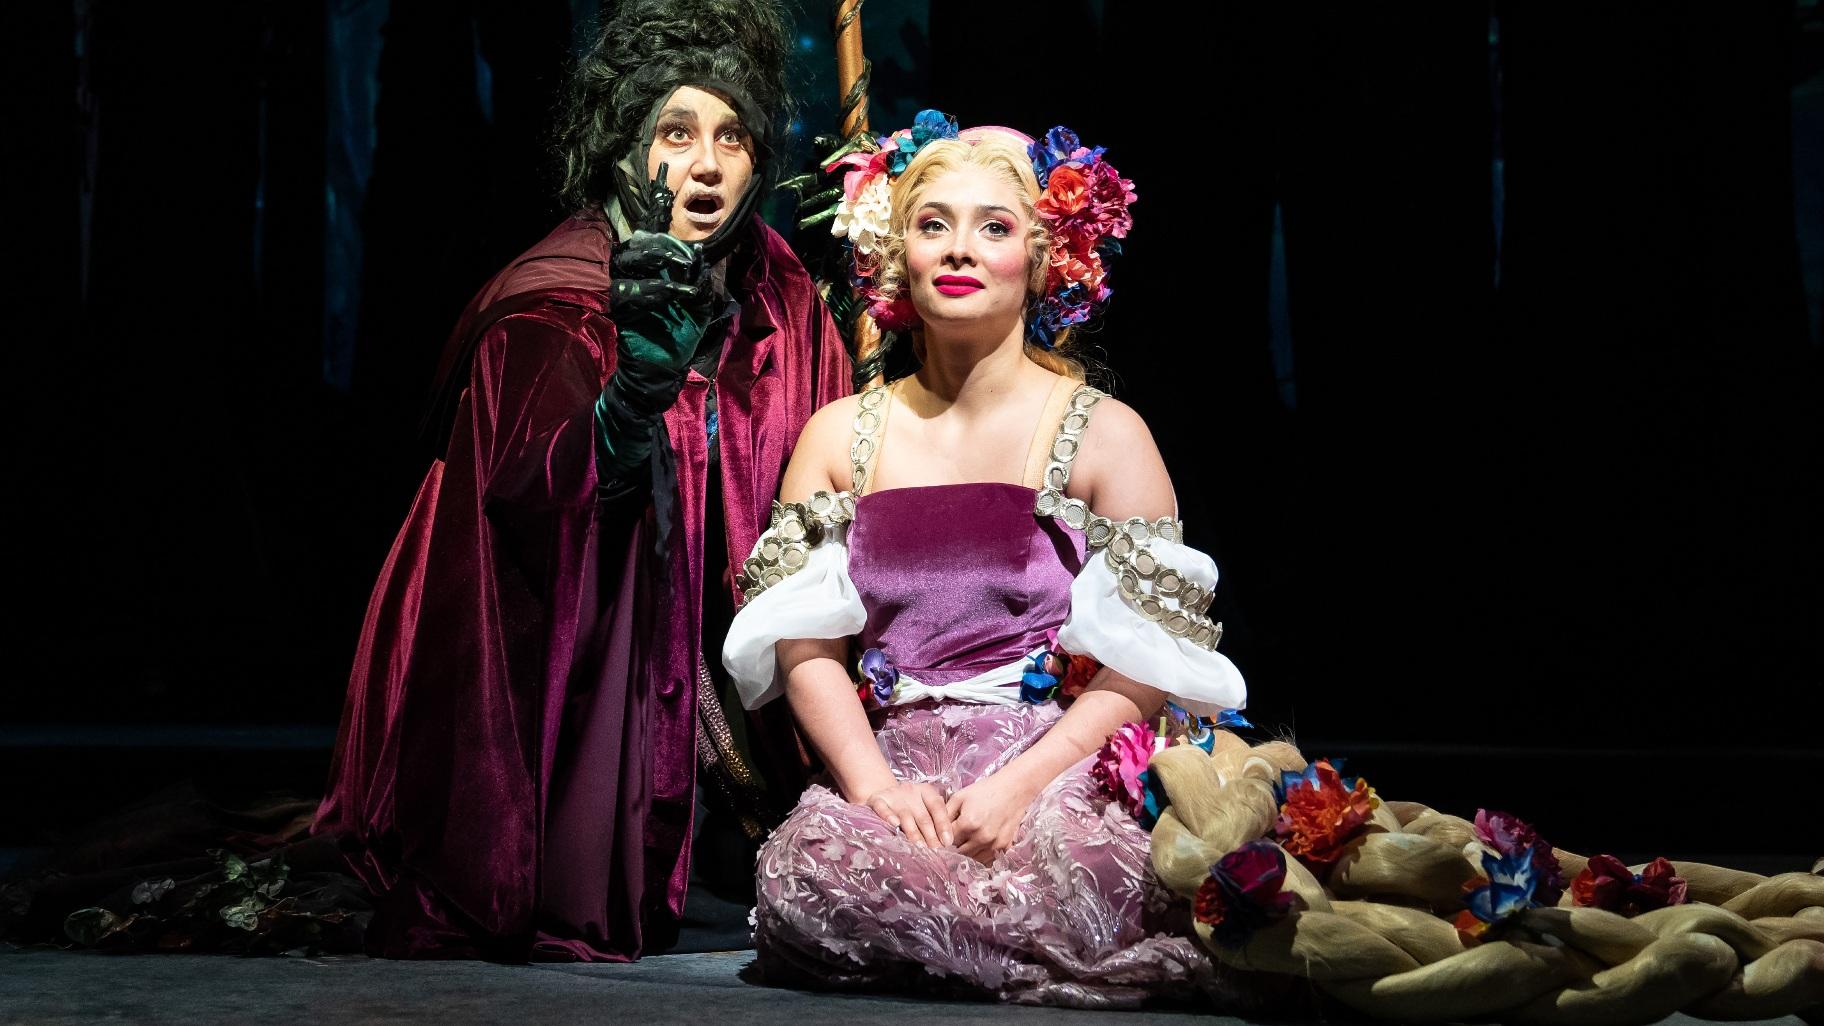 Natalie Weiss (left) plays the Witch and Molly Hernández is Rapunzel in Paramount Theatre’s “Into the Woods.” (Credit: Liz Lauren)